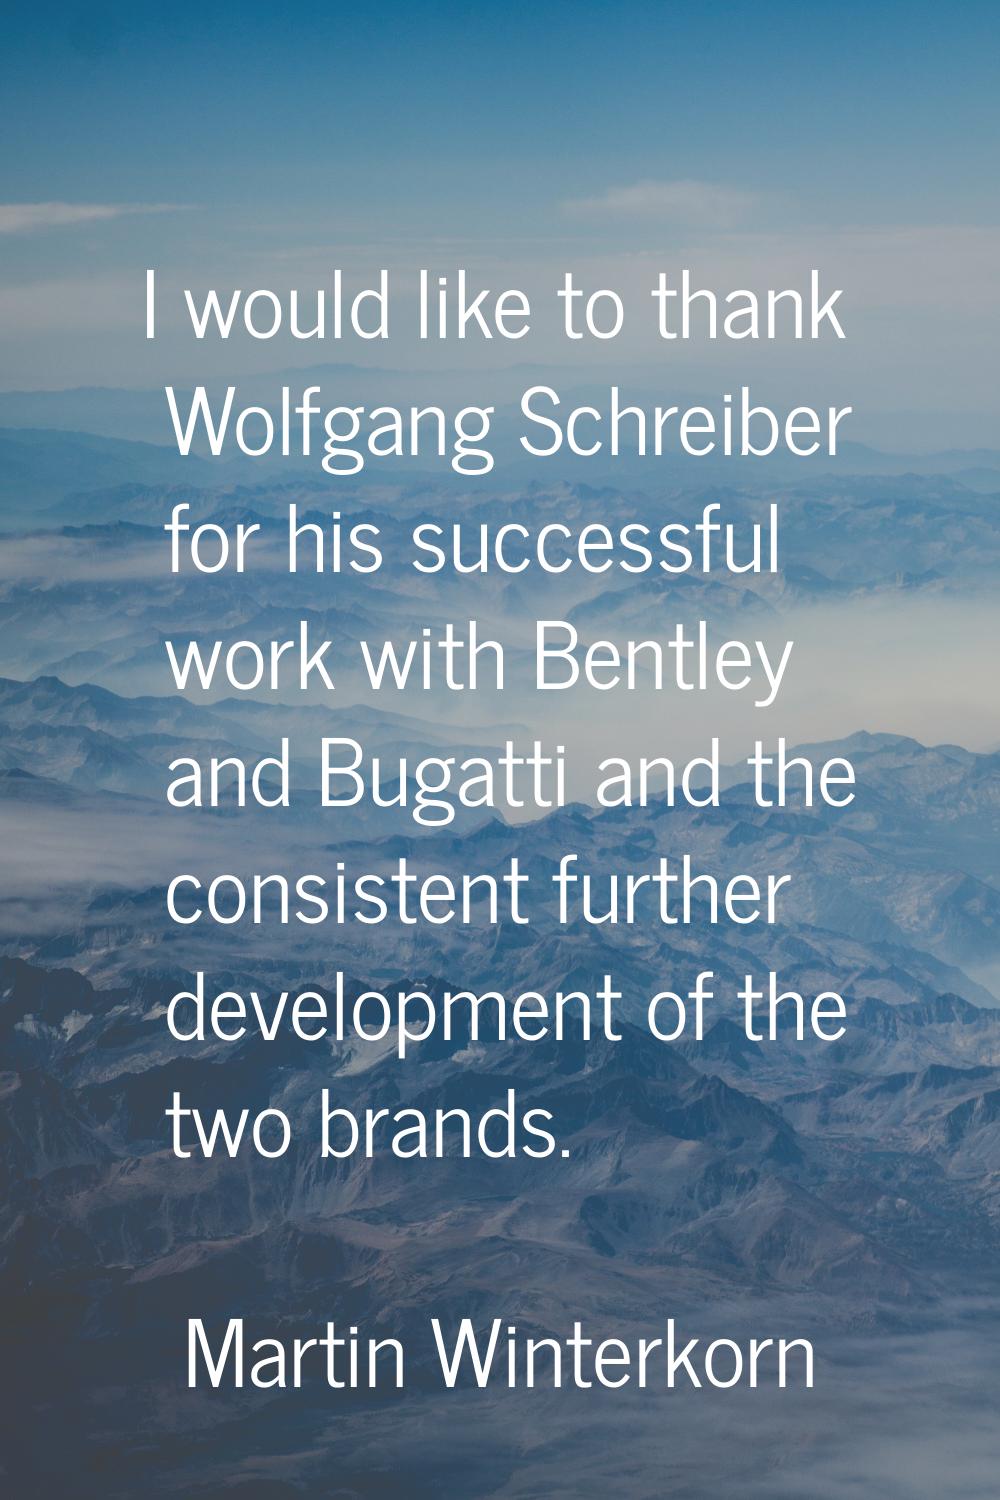 I would like to thank Wolfgang Schreiber for his successful work with Bentley and Bugatti and the c